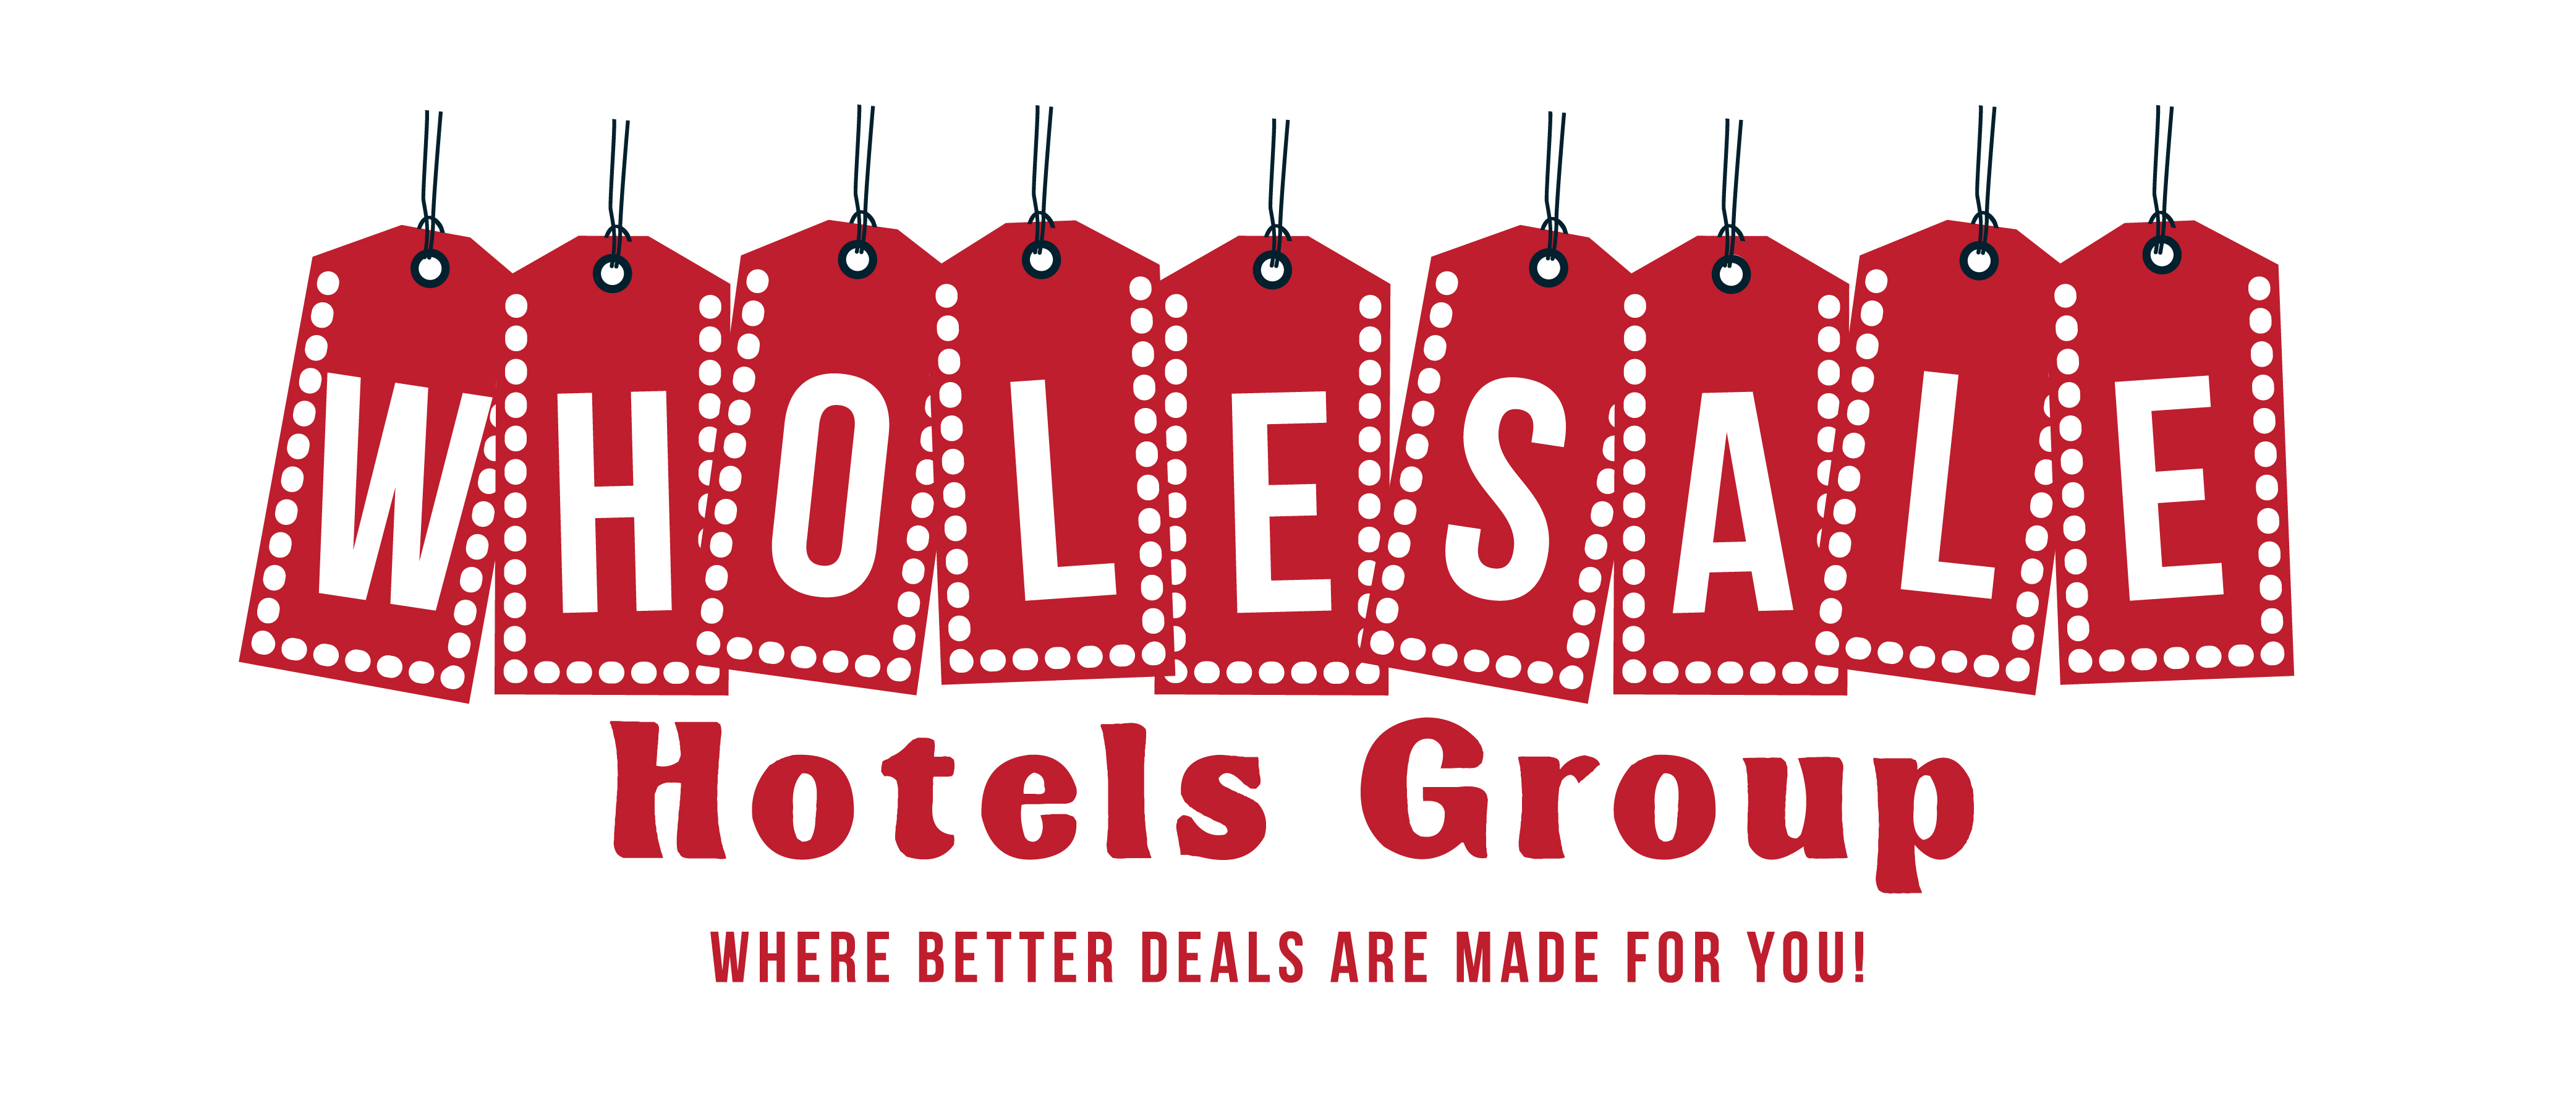 Wholesale Hotels Group - Delivering hotel group deals to your fingertips!